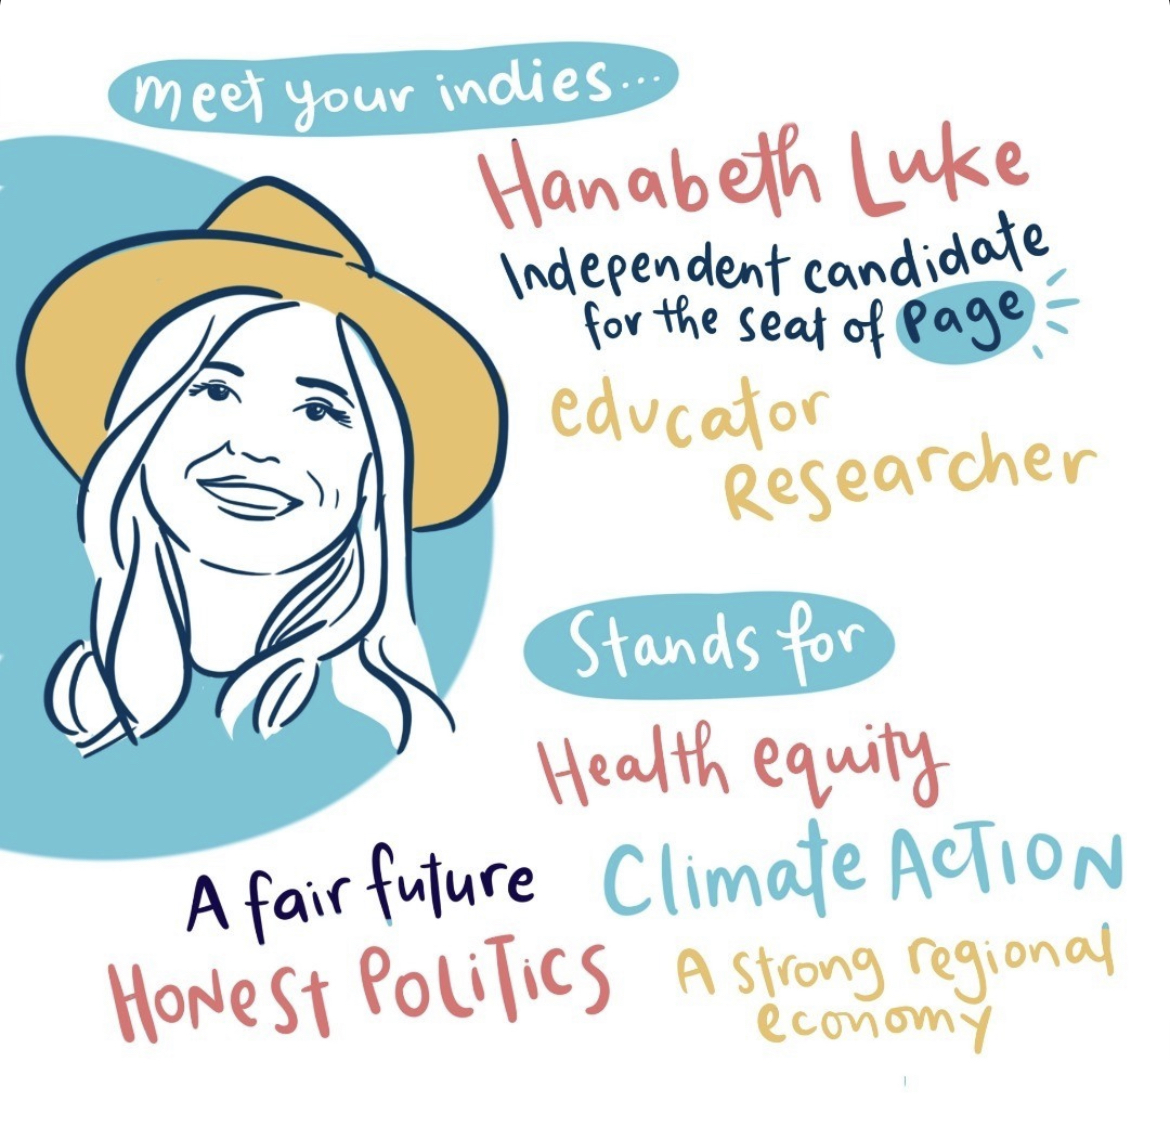 If you stand with me on these issues let's turn the Page today! Vote 1 Hanabeth Luke. I can't wait to share the post-election wrap-up with you all tonight at the Woodburn's Rod n Reel hotel from 6pm - Late. Roll up after polling! #hanabethluke #auspol #pagevotes